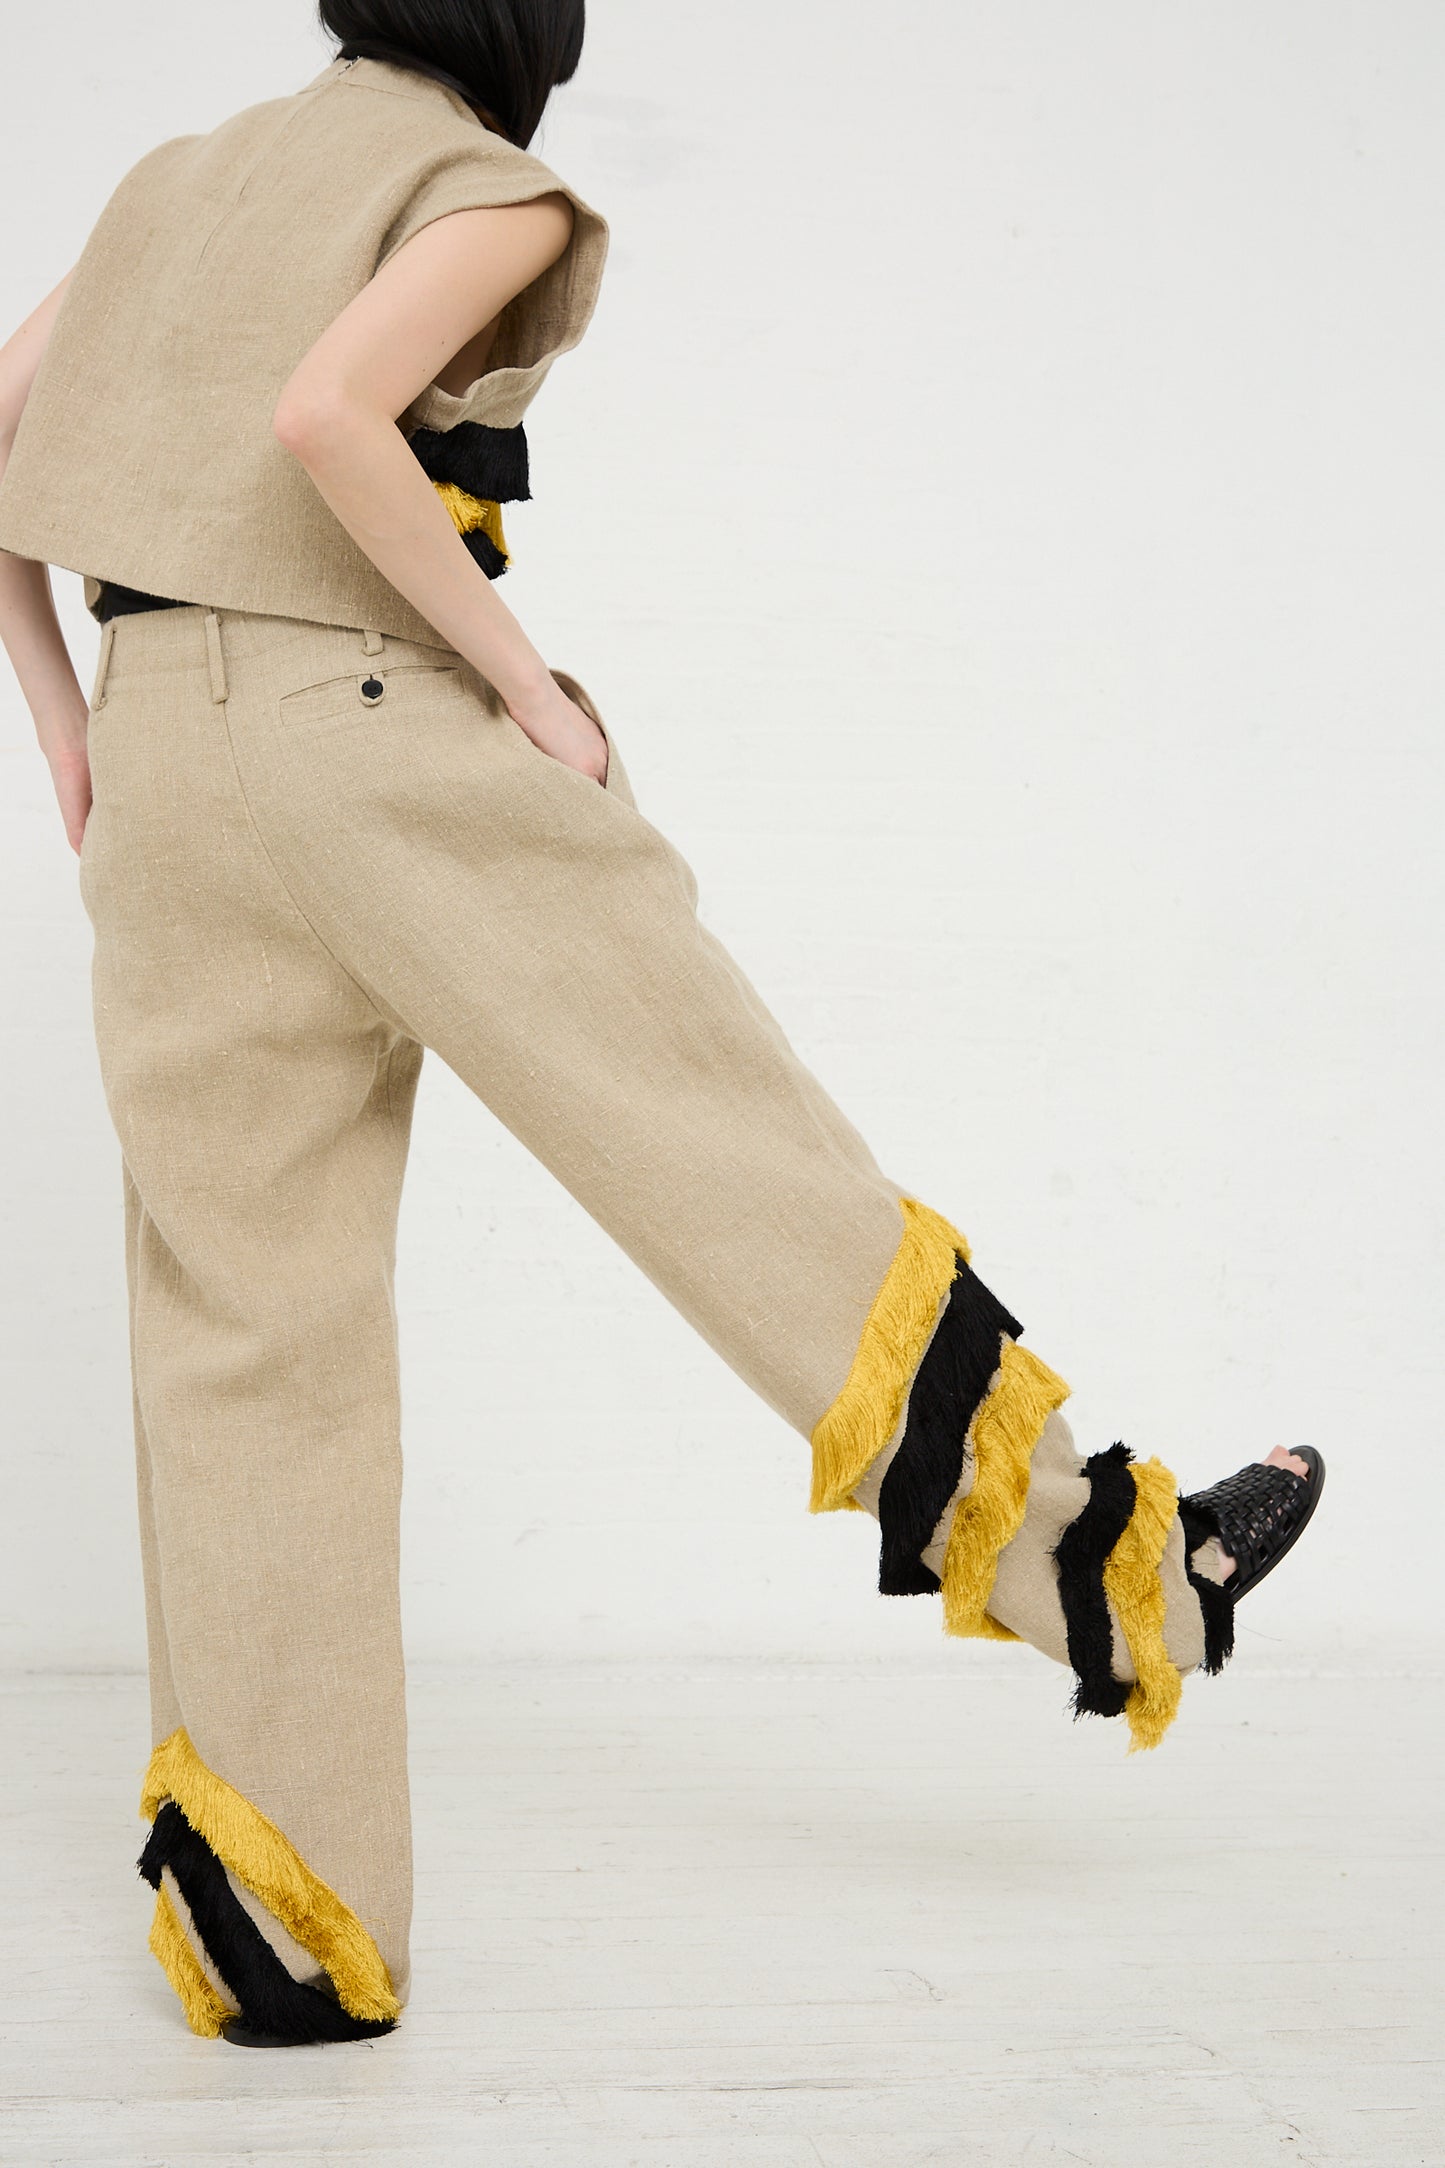 Woman in beige Rachel Comey Ditto Pant in Natural outfit with black and yellow fringed details on textured linen pants, captured mid-step against a white background.